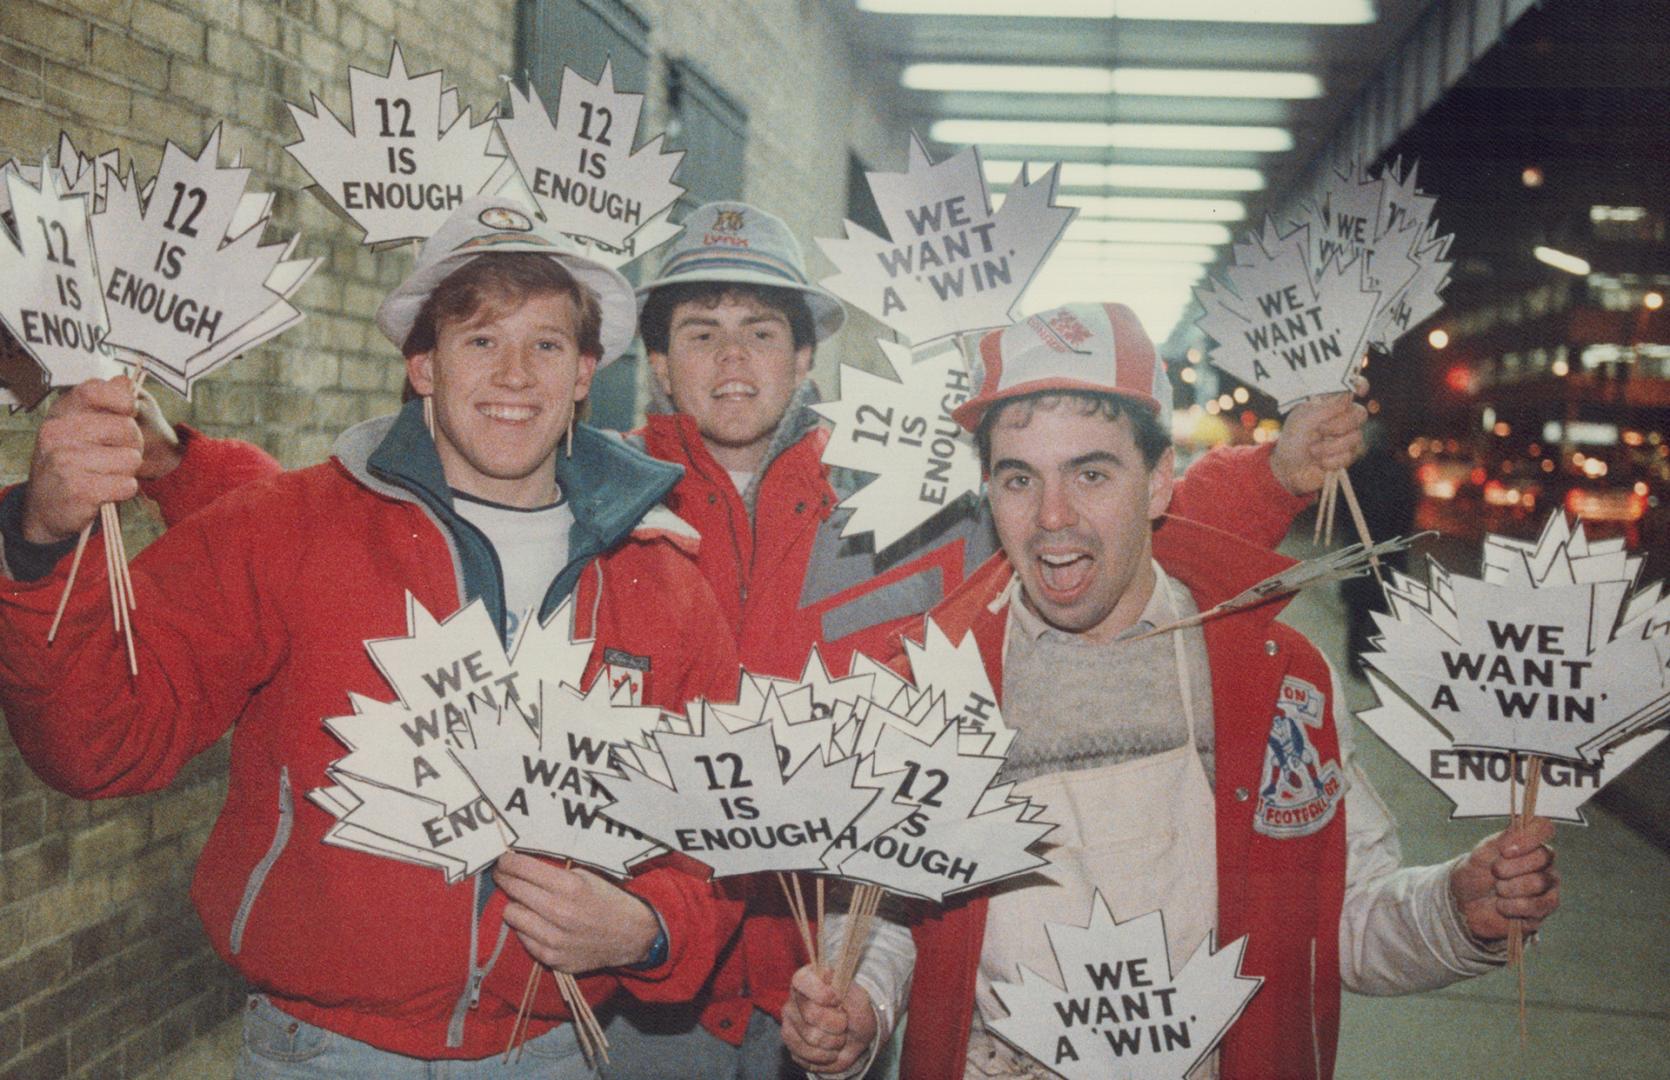 An attempt by three Burlington fans to change the fortunes of the Leafs failed last night as Toronto lost 5-4 to Quebec